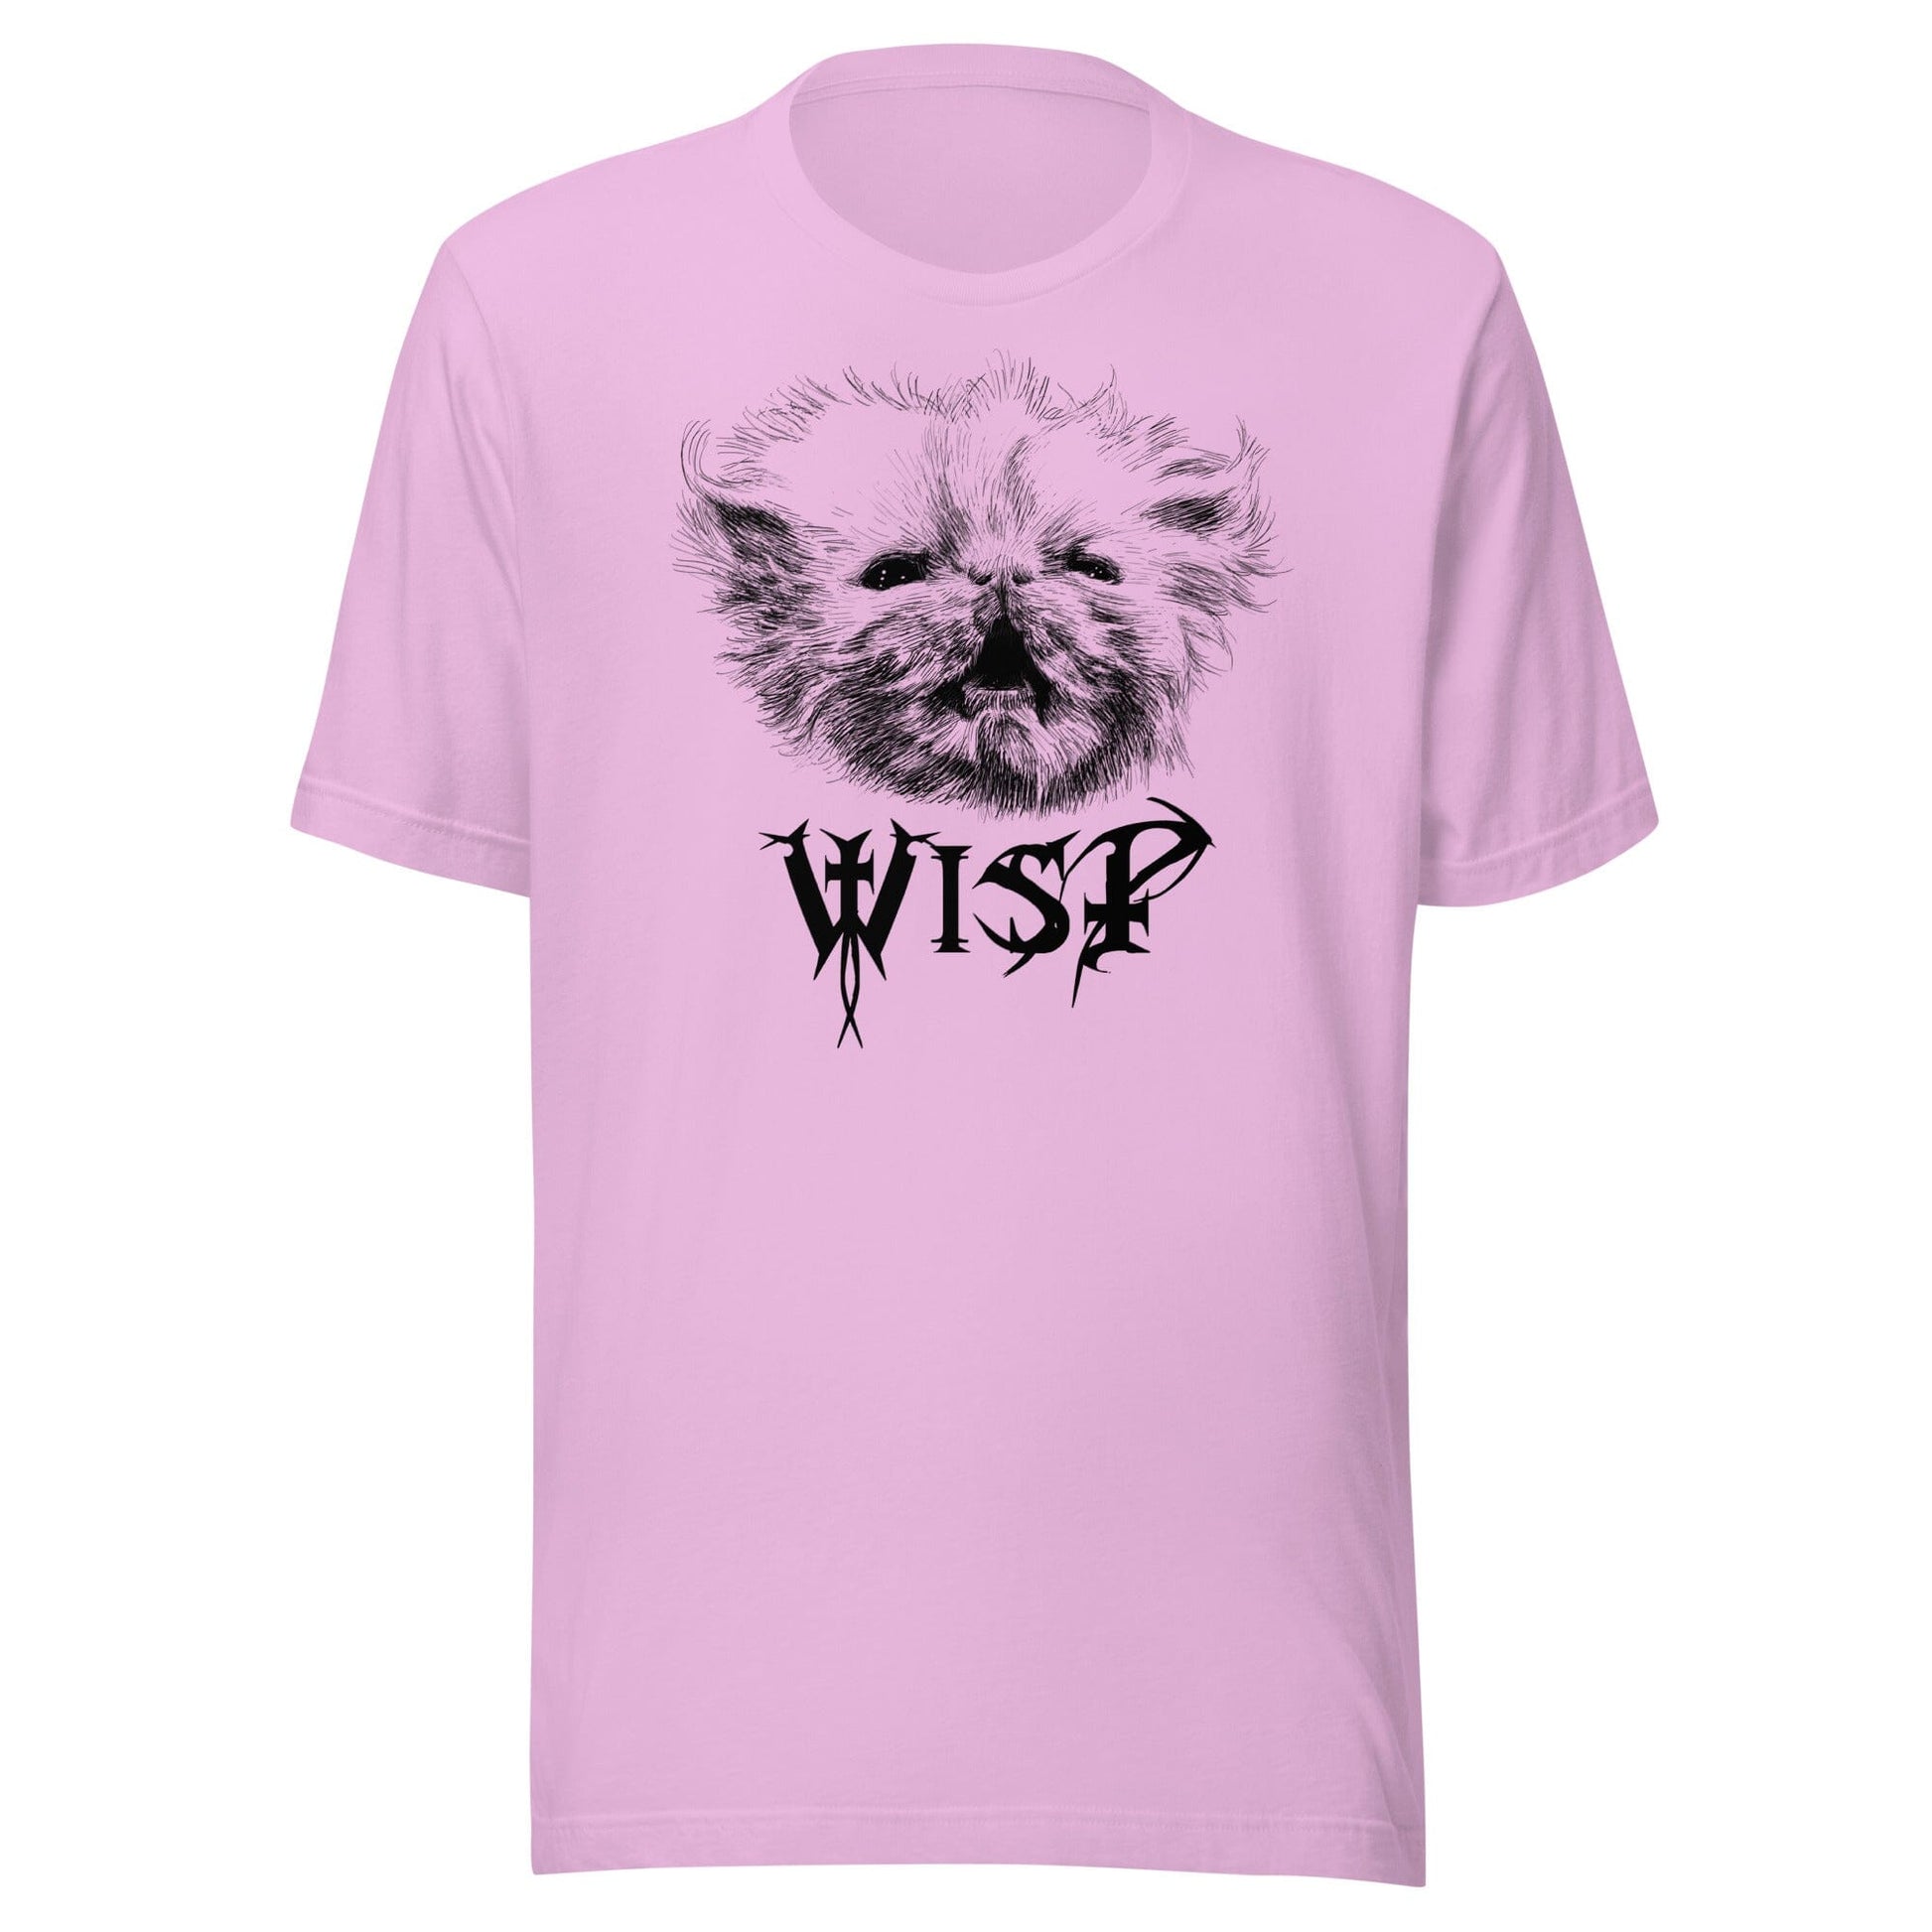 Metal Wisp T-Shirt [Unfoiled] (All net proceeds go to Rags to Riches Animal Rescue) JoyousJoyfulJoyness Lilac S 